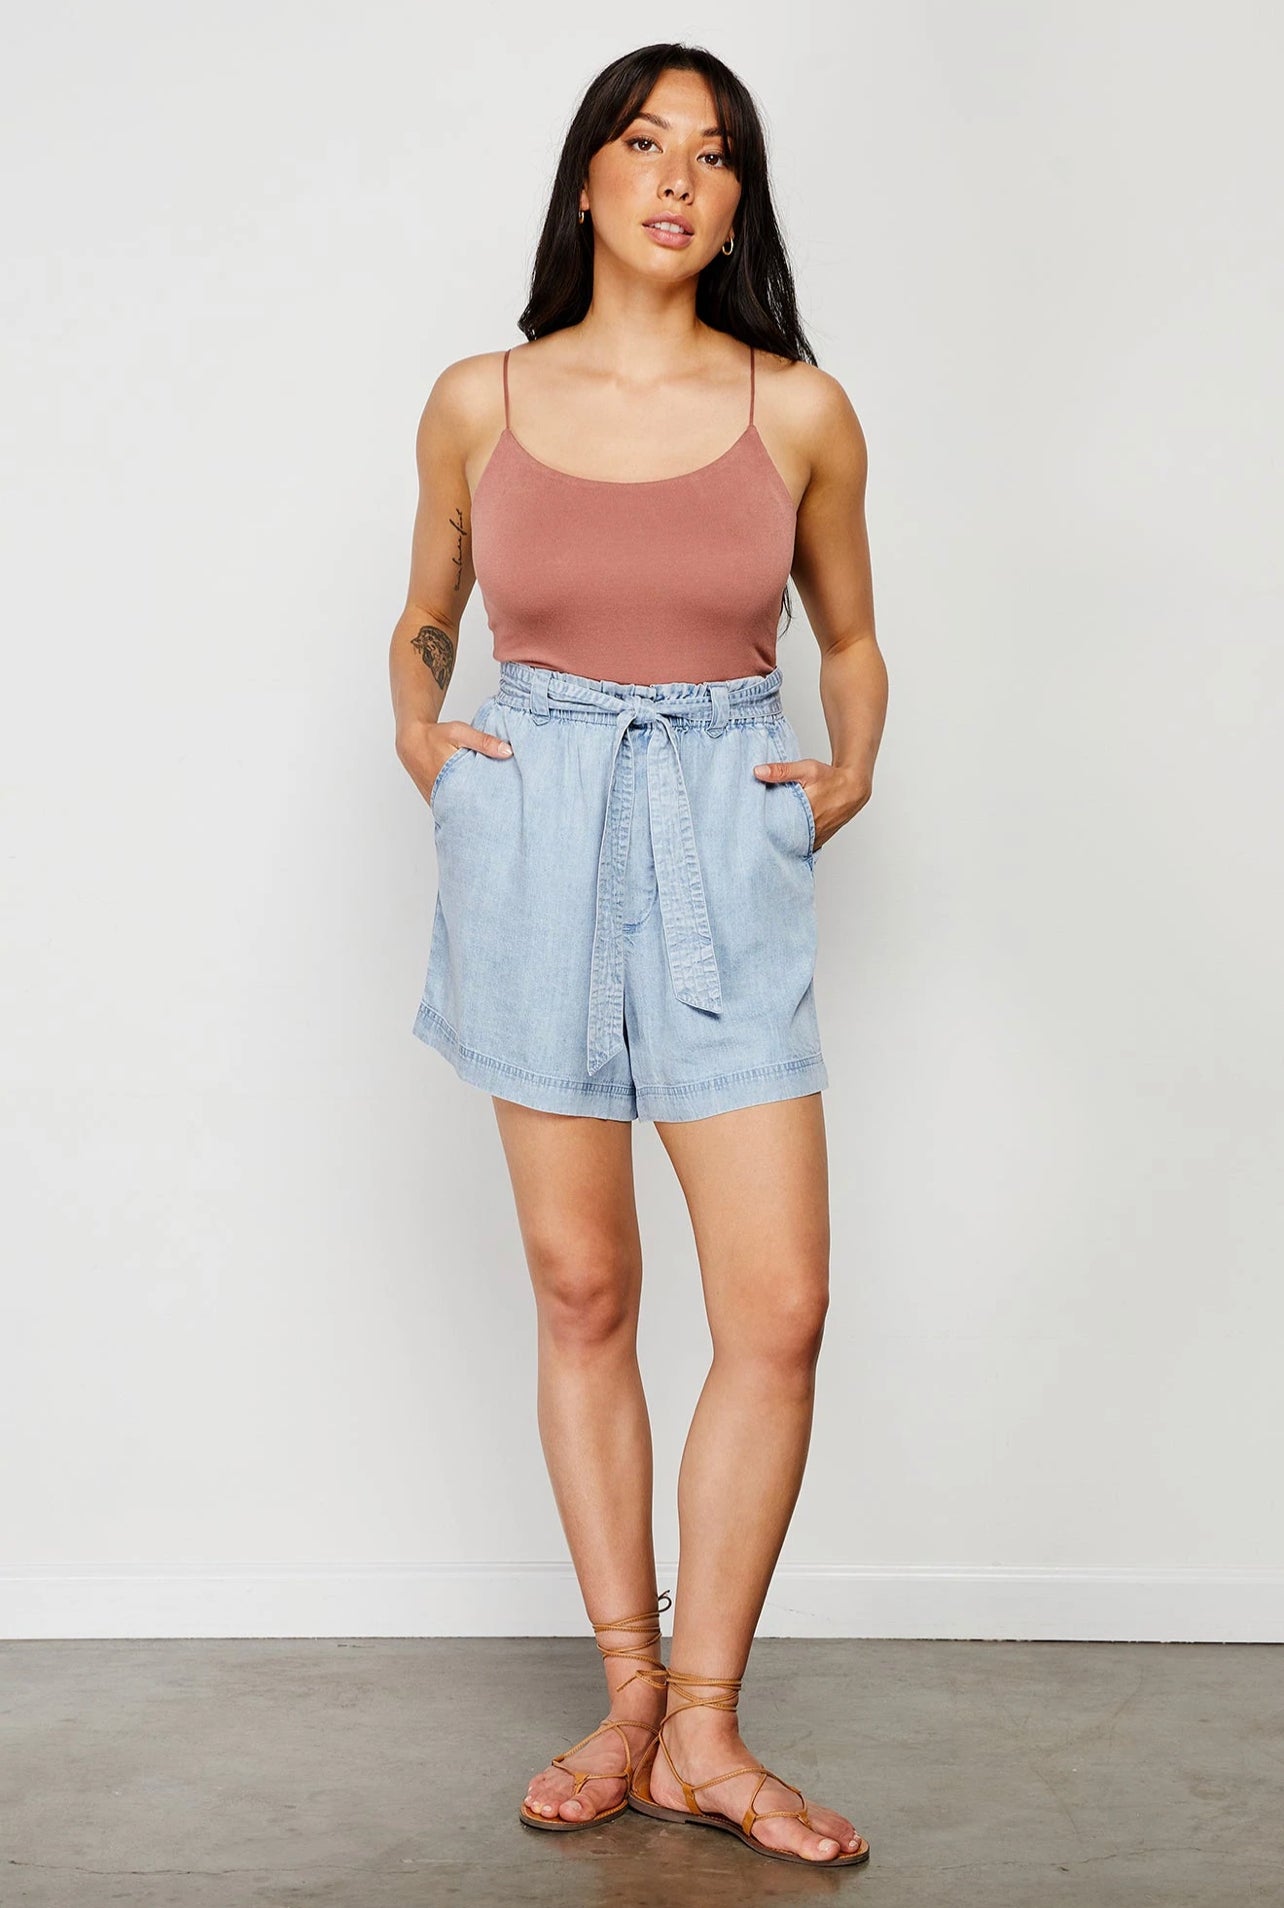 GENTLE FAWN ANGELINE STRAPPY TOP